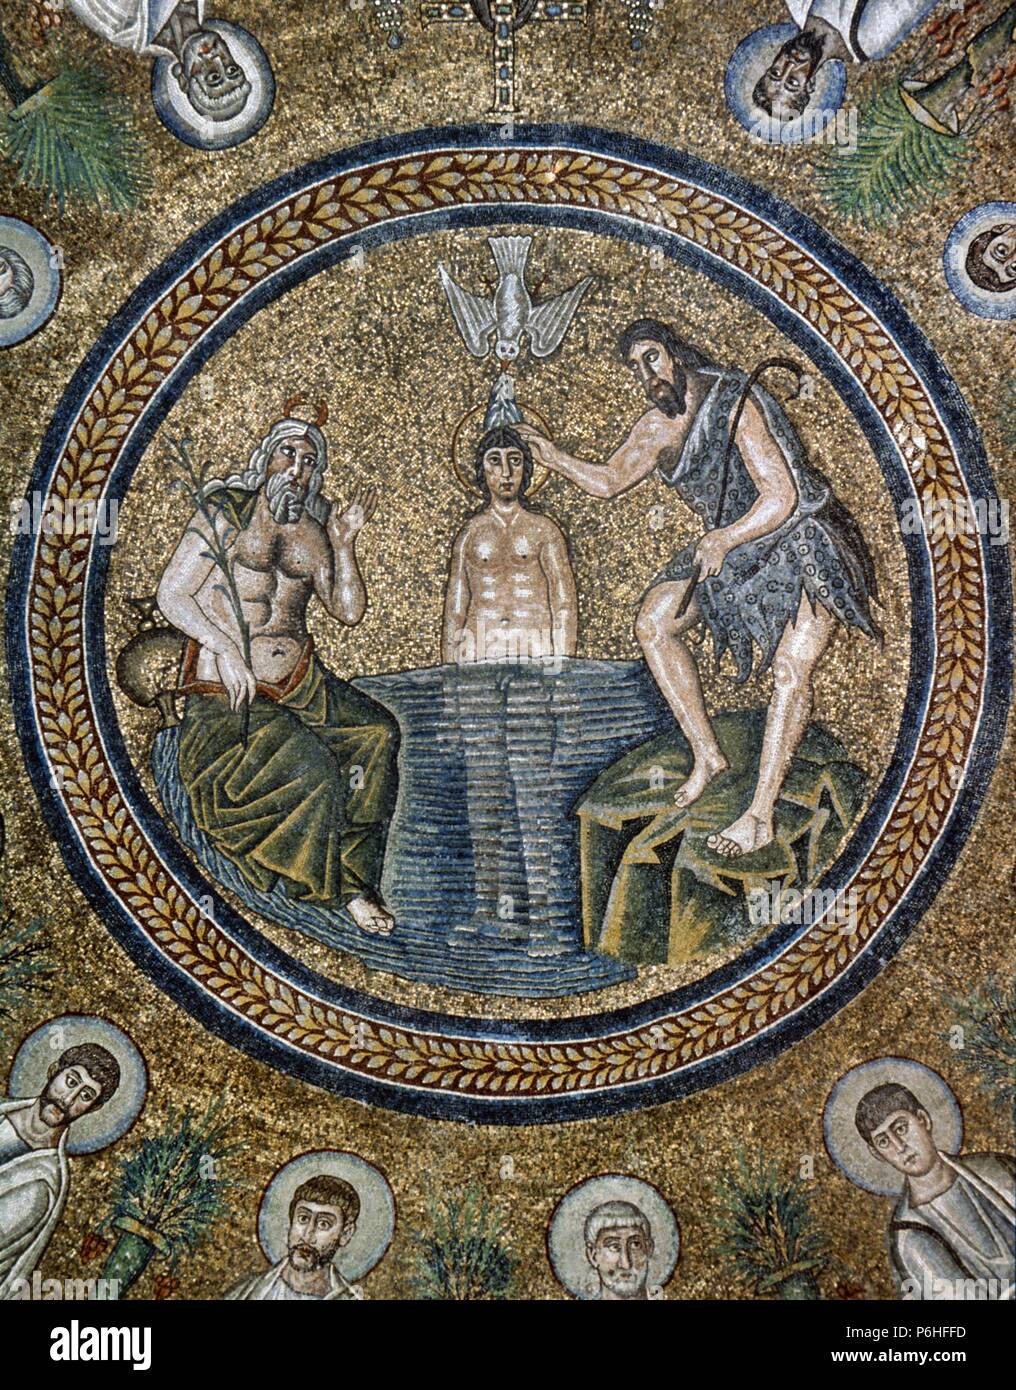 Italy. Ravenna. Arian Baptistry. Erected by the Ostrogothic King Theodoric the Great. Ceiling Mosaic. Baptism of Jesus by Saint John the Baptist. 6th century. Stock Photo